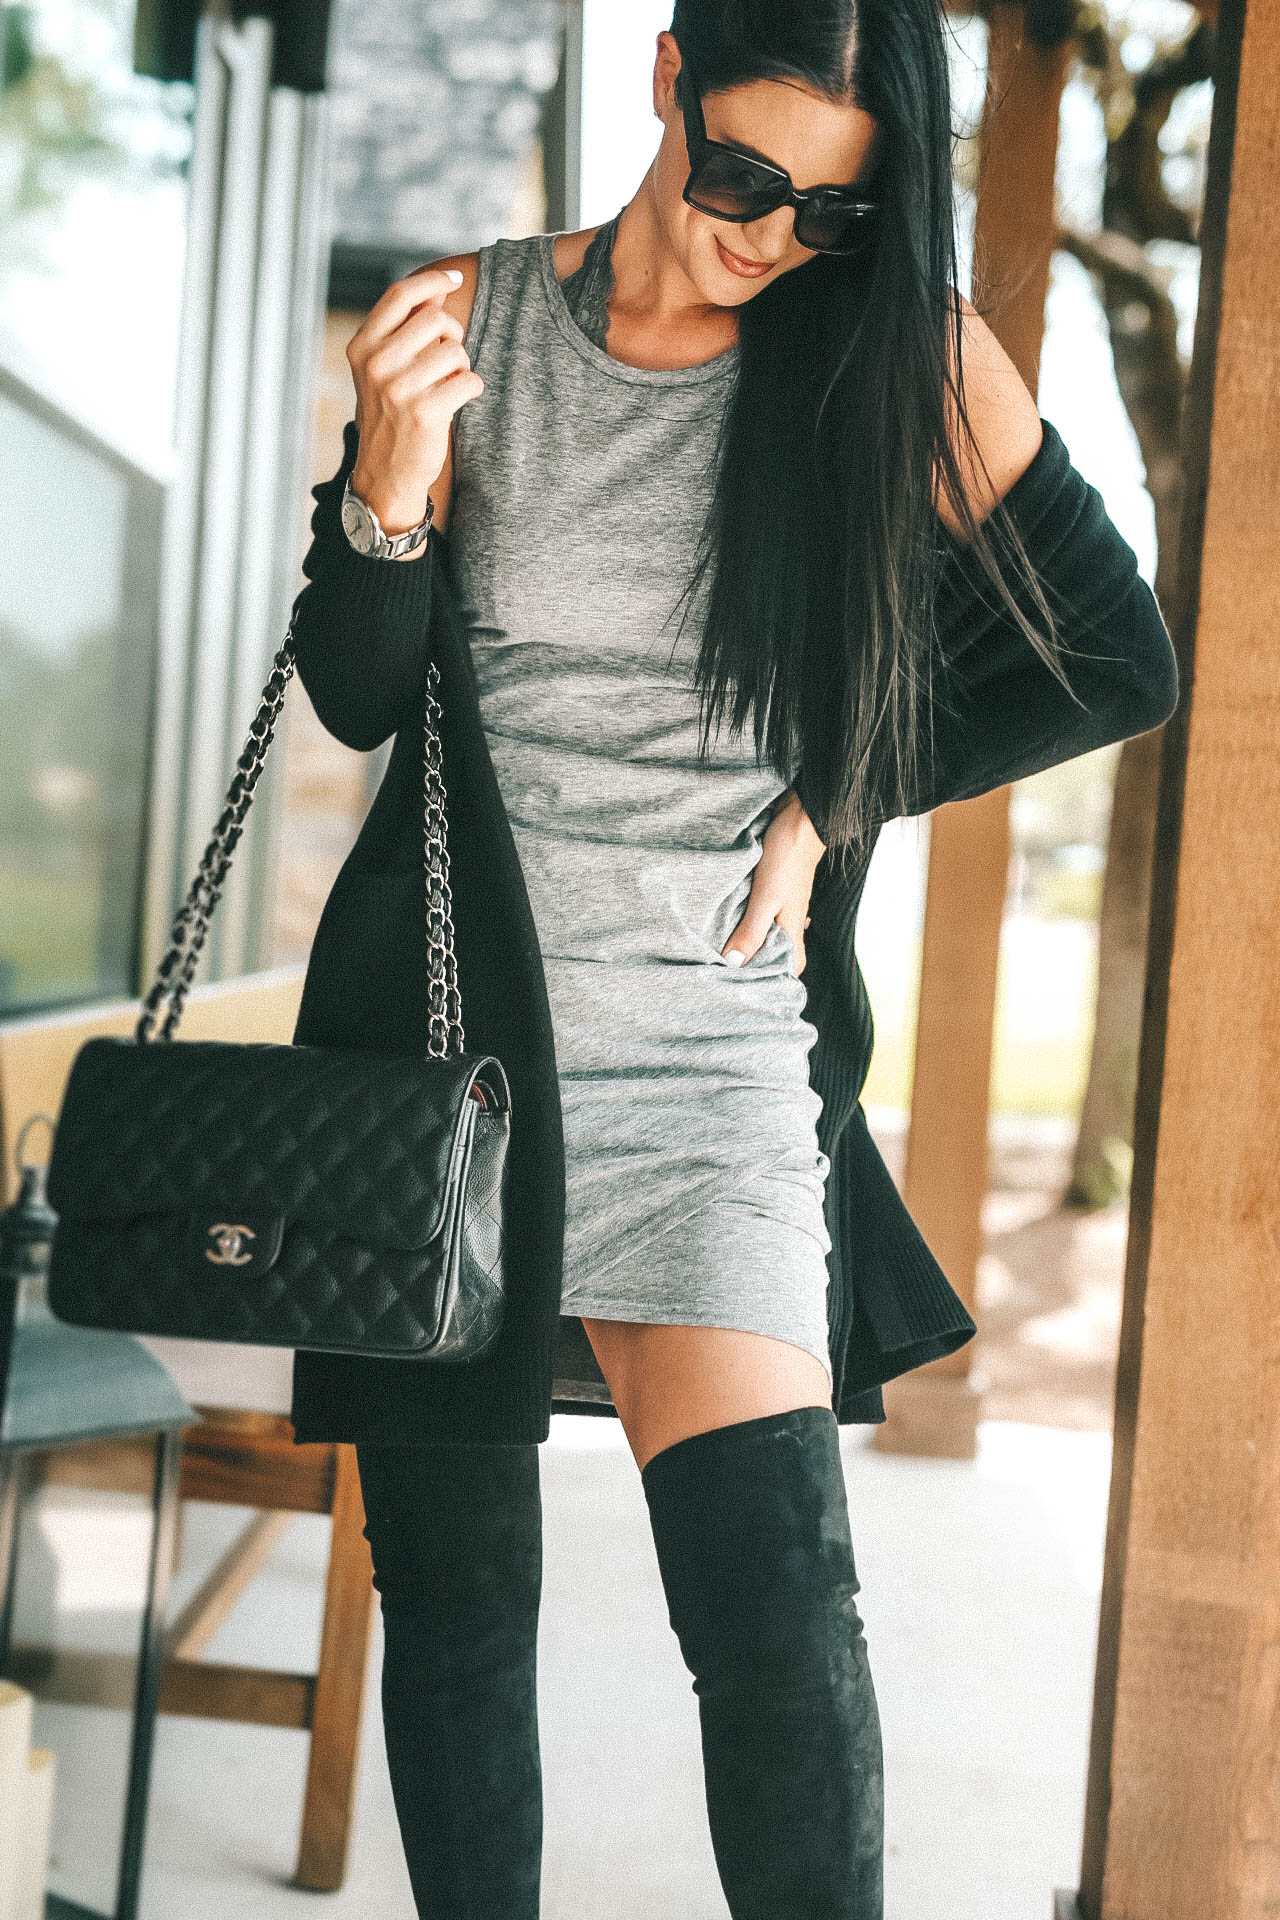 DTKAustin shares her must have cashmere from the NSALE Nordstrom Anniversary Sale. Starting with this Vince cashmere cardigan, Steve Madden OTK Over the Knee boots and Leith body-con dress. Must Have Cashmere Pieces | 2018 Nordstrom Anniversary Sale || Dressed to Kill #style #fashion #womensoutfit #cashmere #cashmeresweater #cashmerescarf #cashmerecardigan #dtkaustin - {Must Have Cashmere from the Nordstrom Anniversary Sale + Giveaway} featured by popular Austin fashion blogger Dressed to Kill